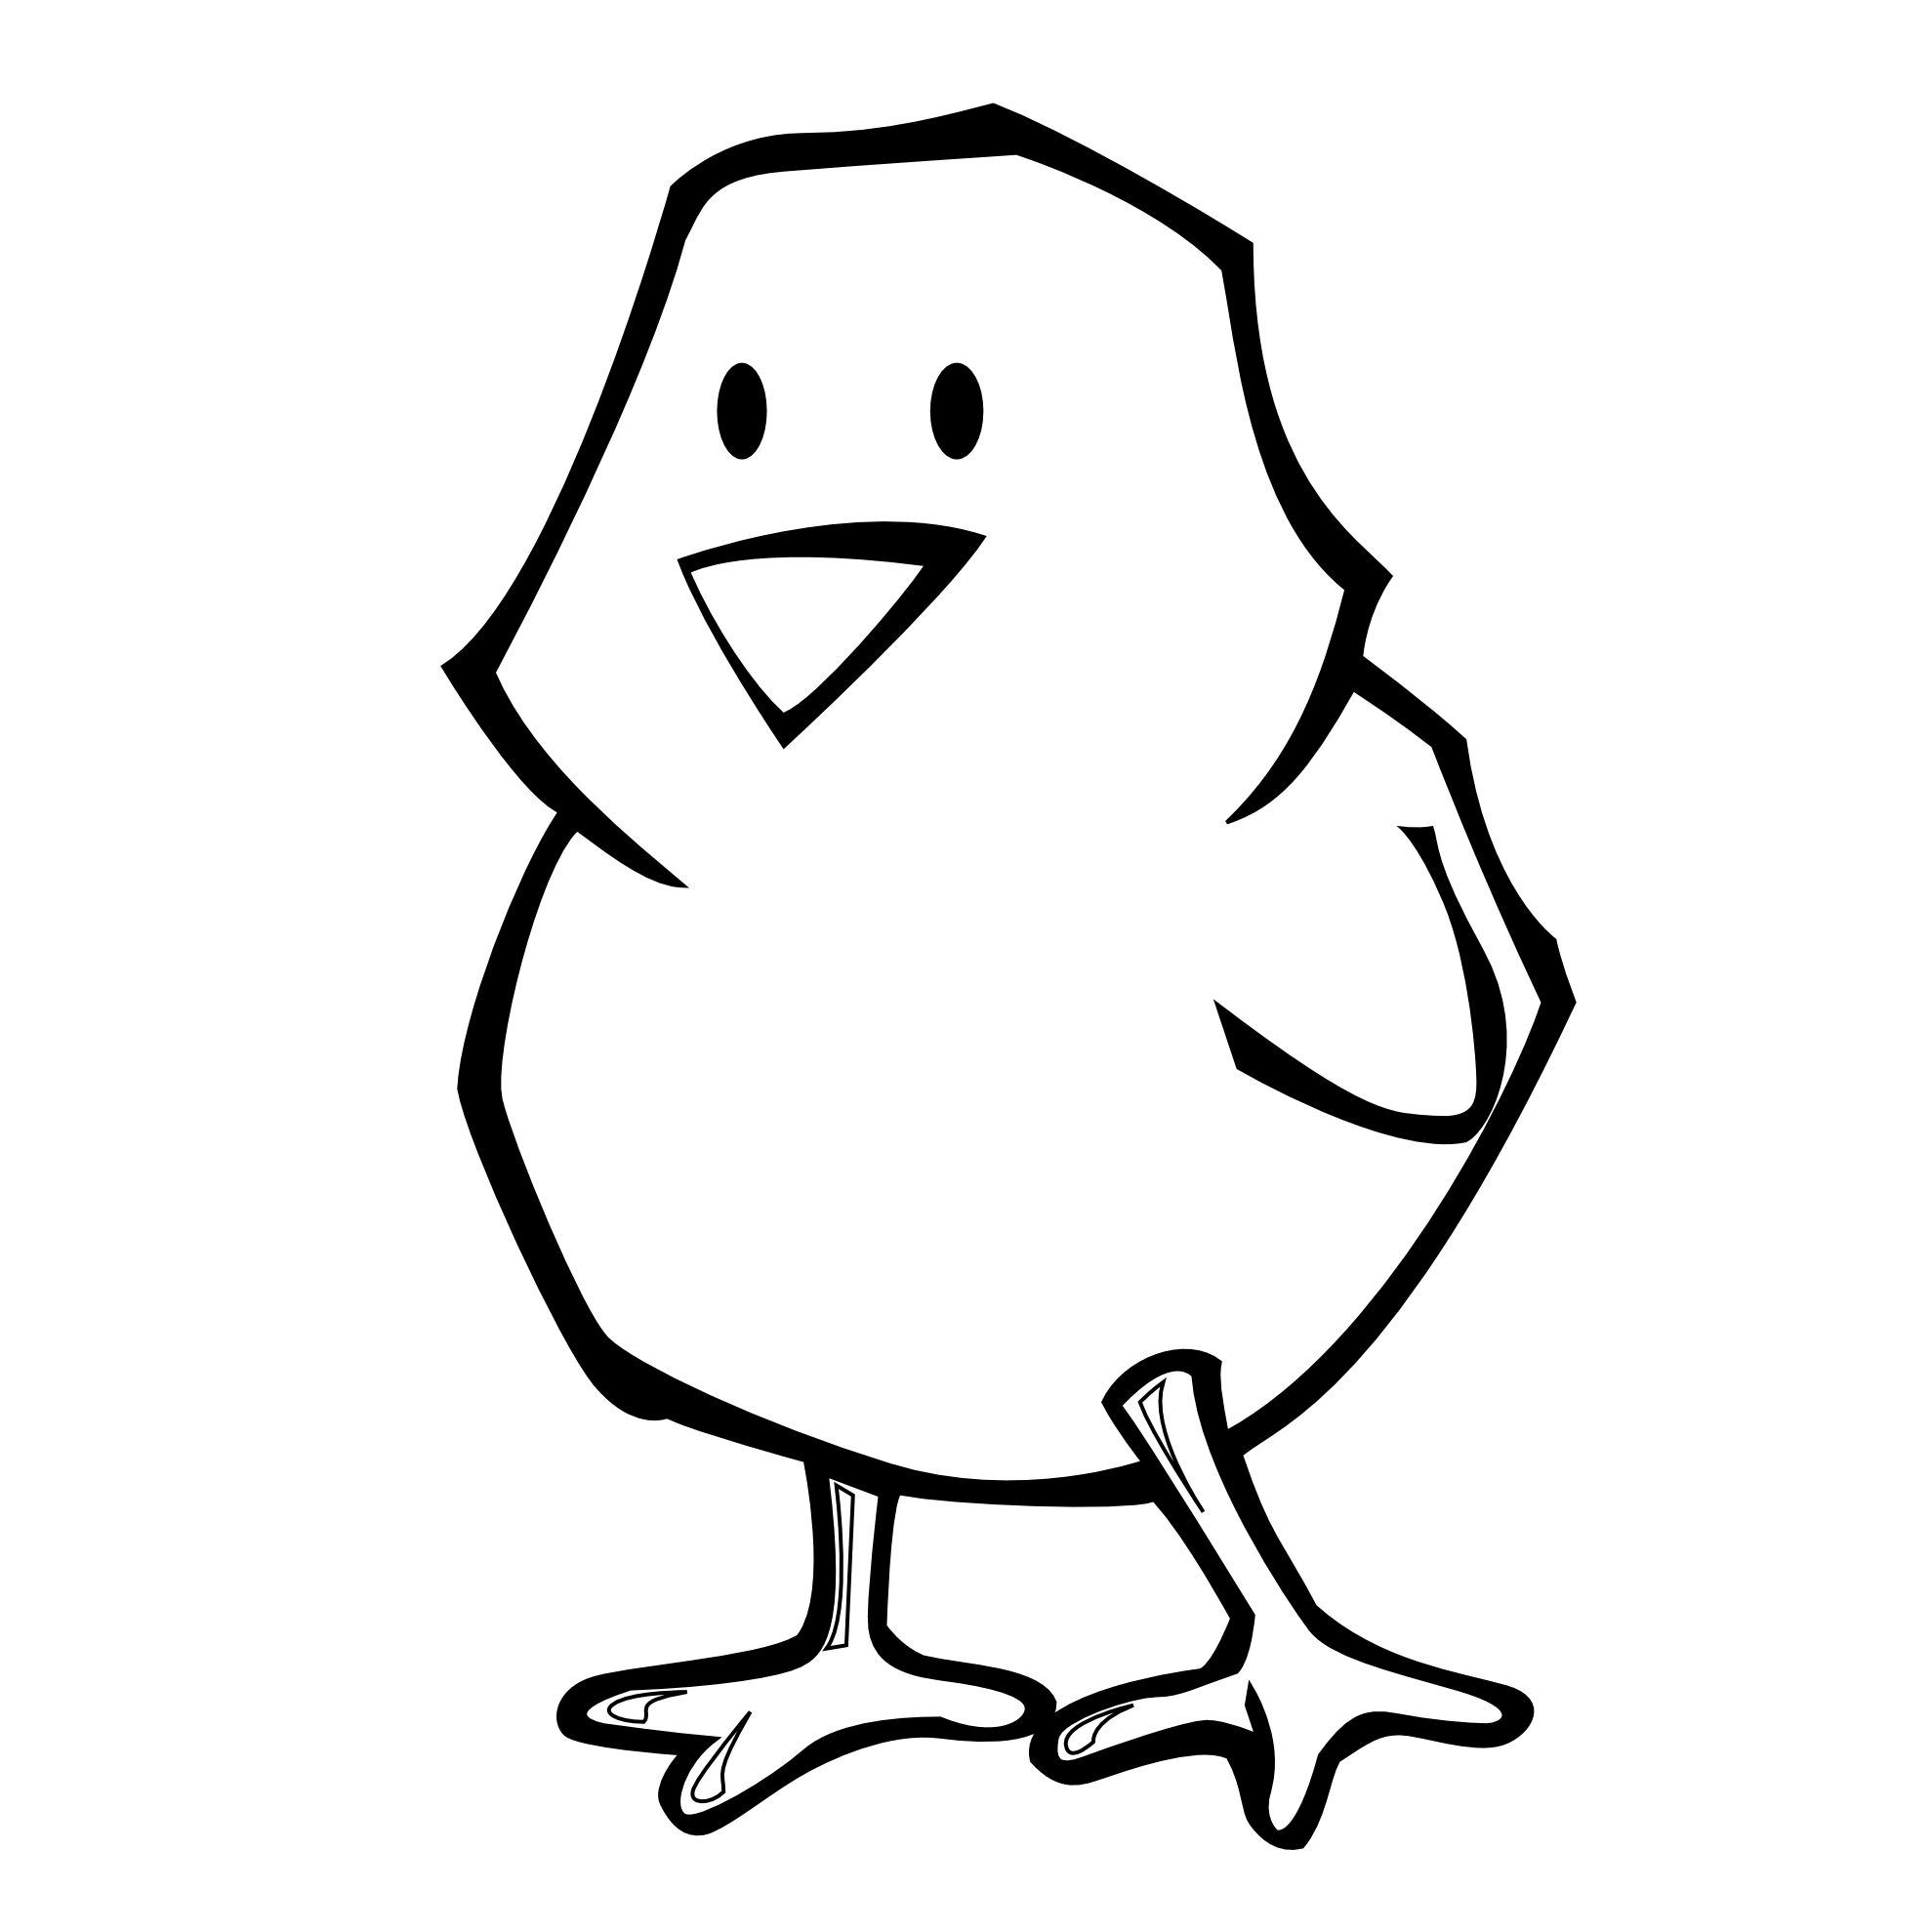 Spring Chick Clip Art Black and White